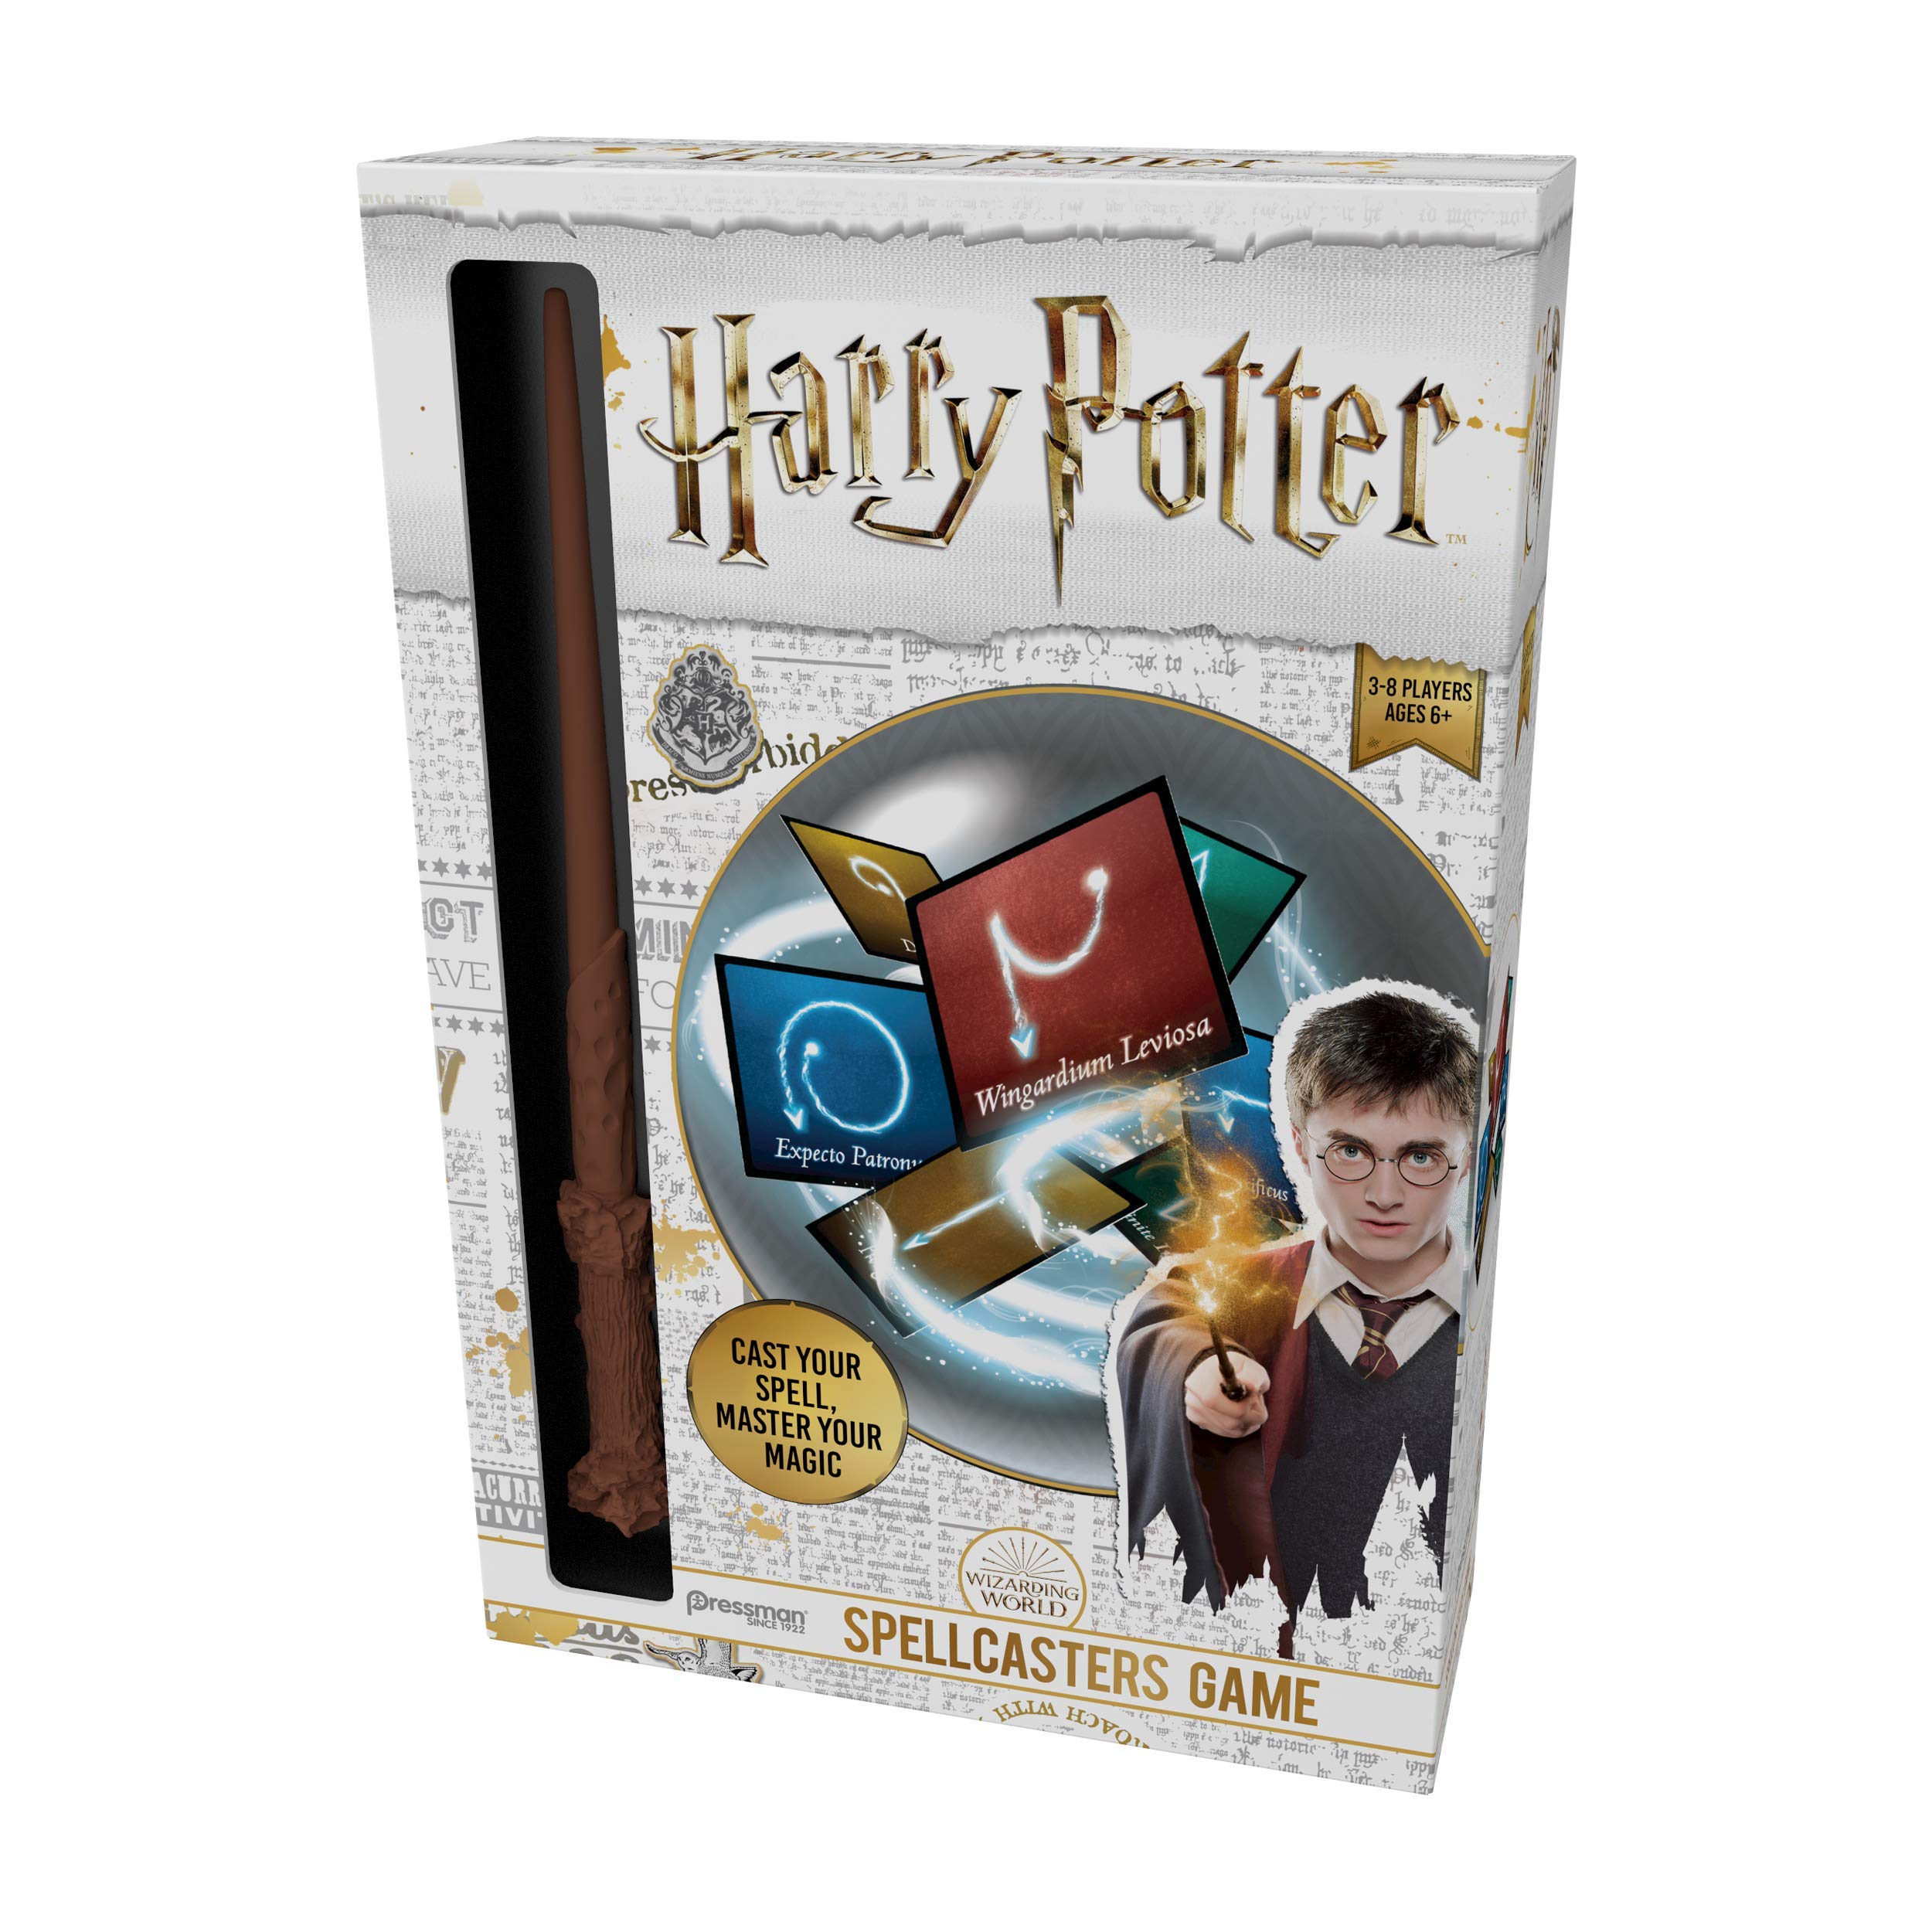 Harry Potter Spellcasters-A Charade Game with A Magical Spin - Cast Your Spell and Master Your Magic - Includes Spellcaster Wand (Replica of Harry Potter's Wand), 32 Spell and 32 Spellcaster Cards